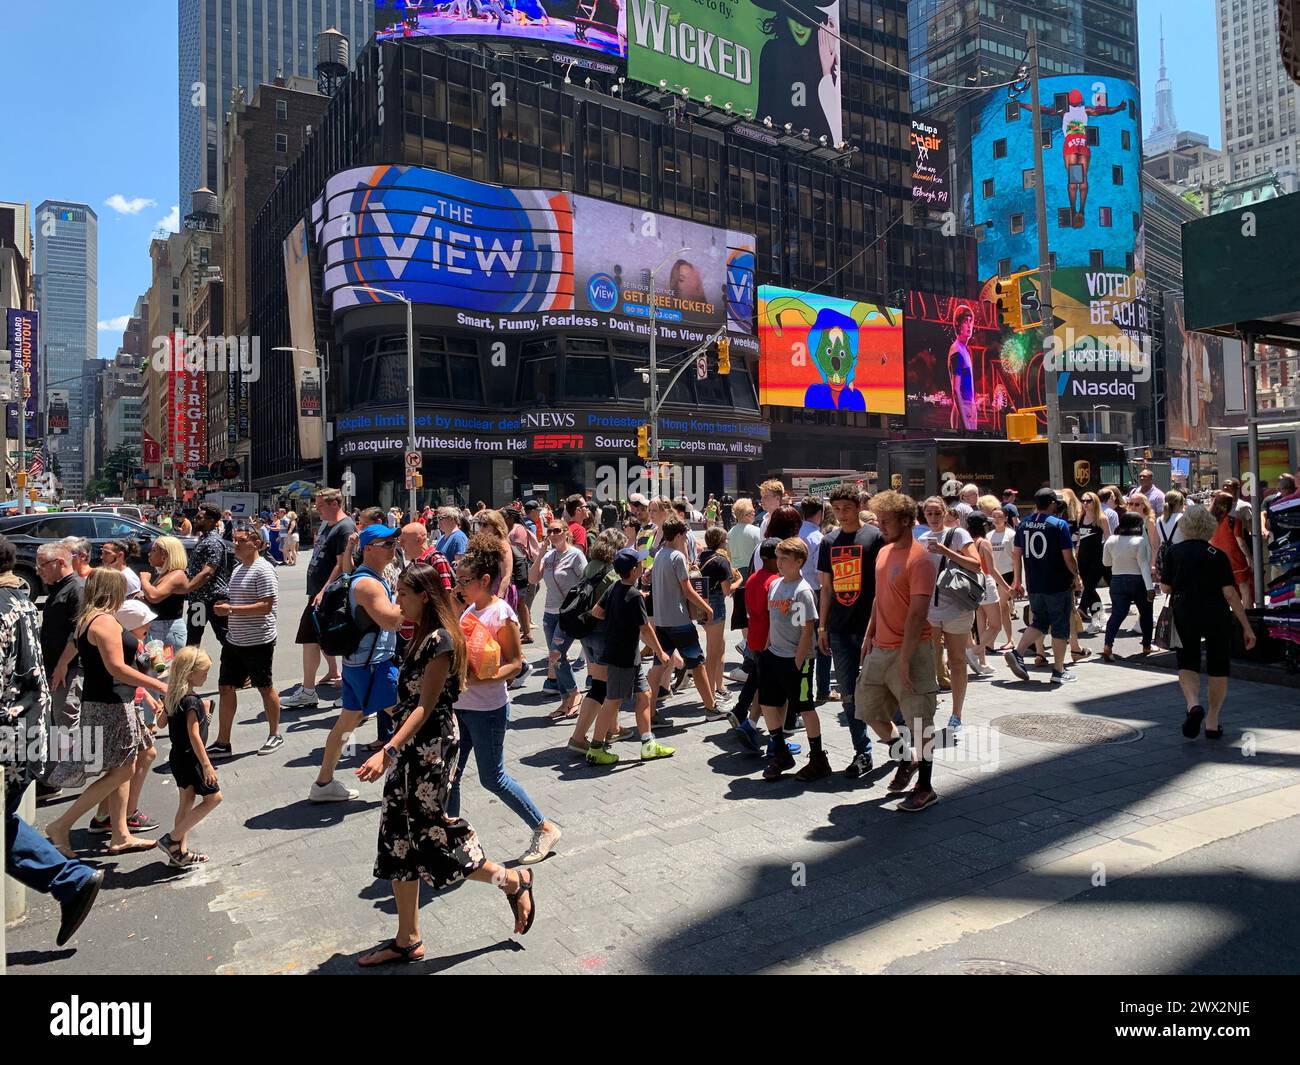 The streets of New York City's Times Square are crowded as pedestrians make their way through the crosswalk Stock Photo